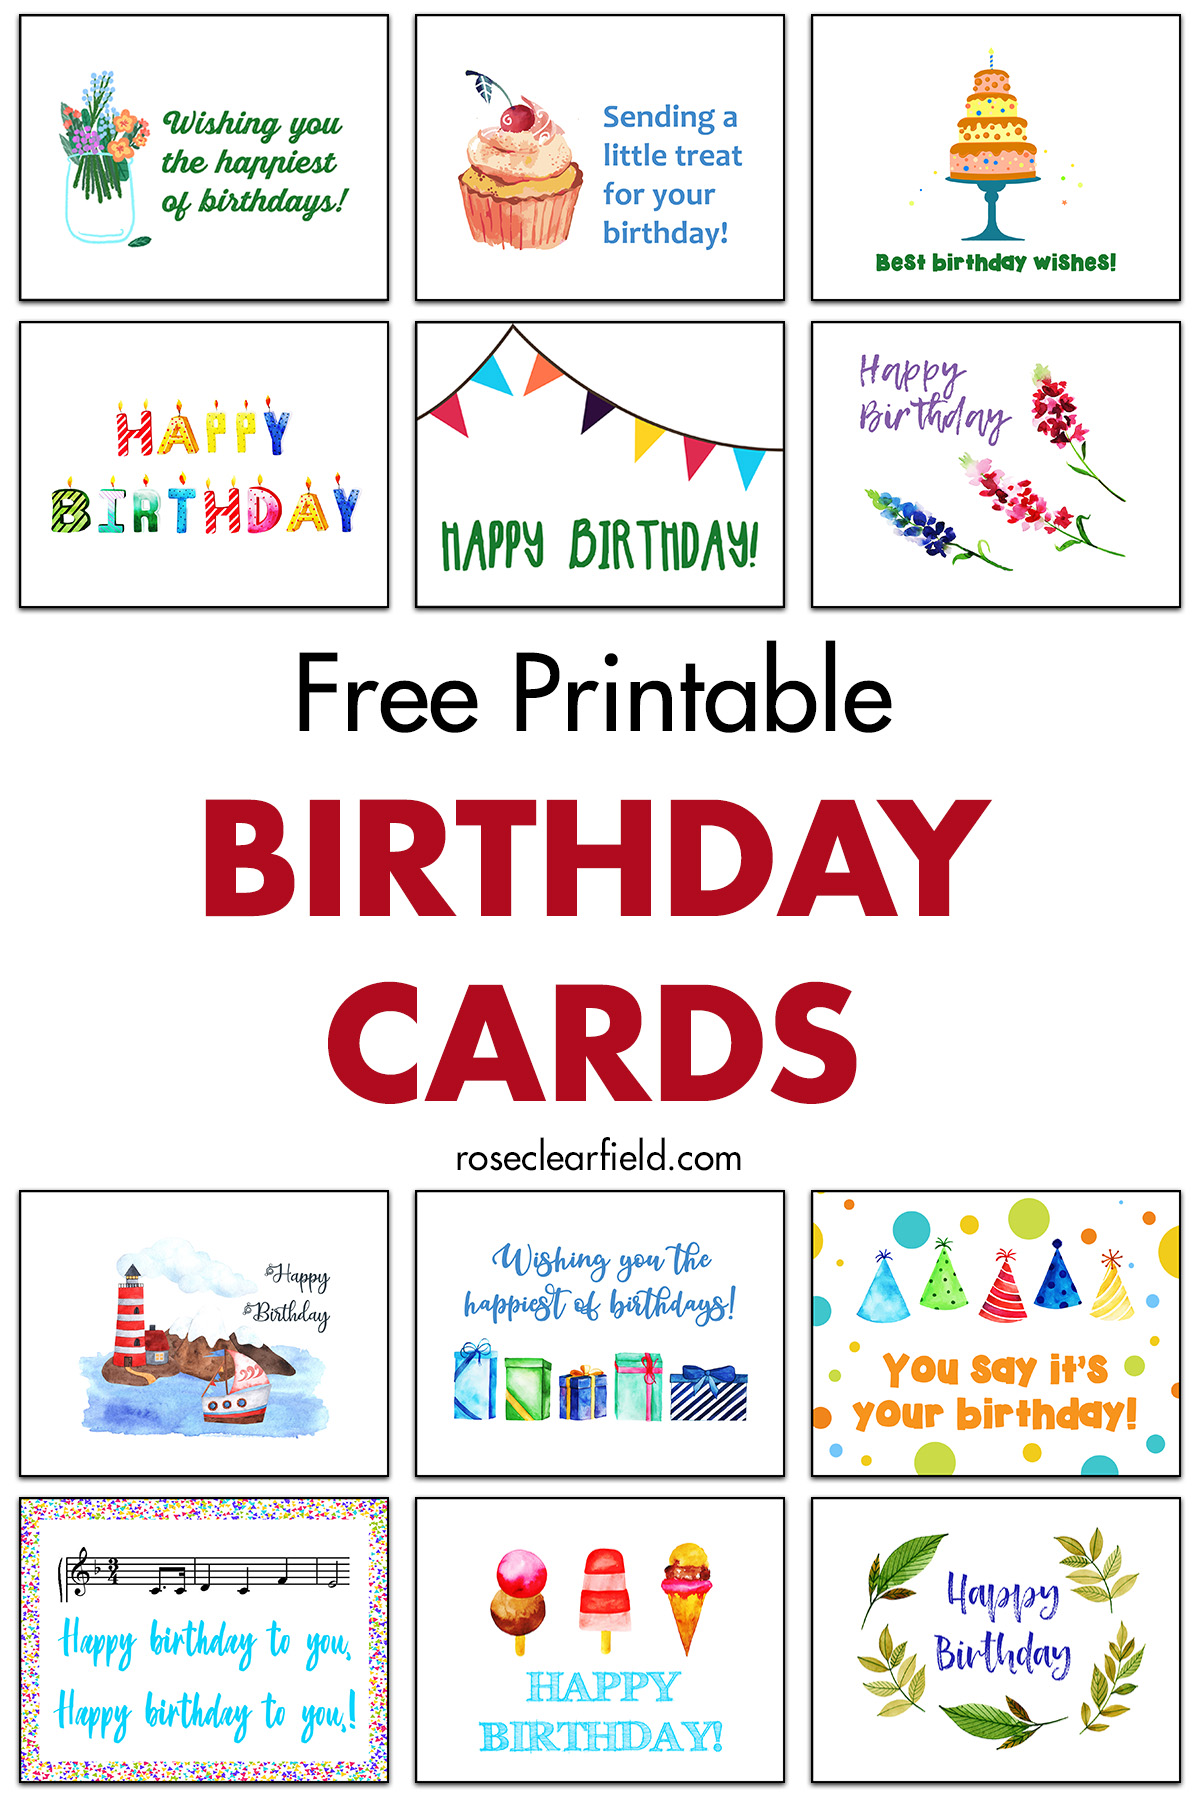 Free Printable Birthday Cards - Rose Clearfield